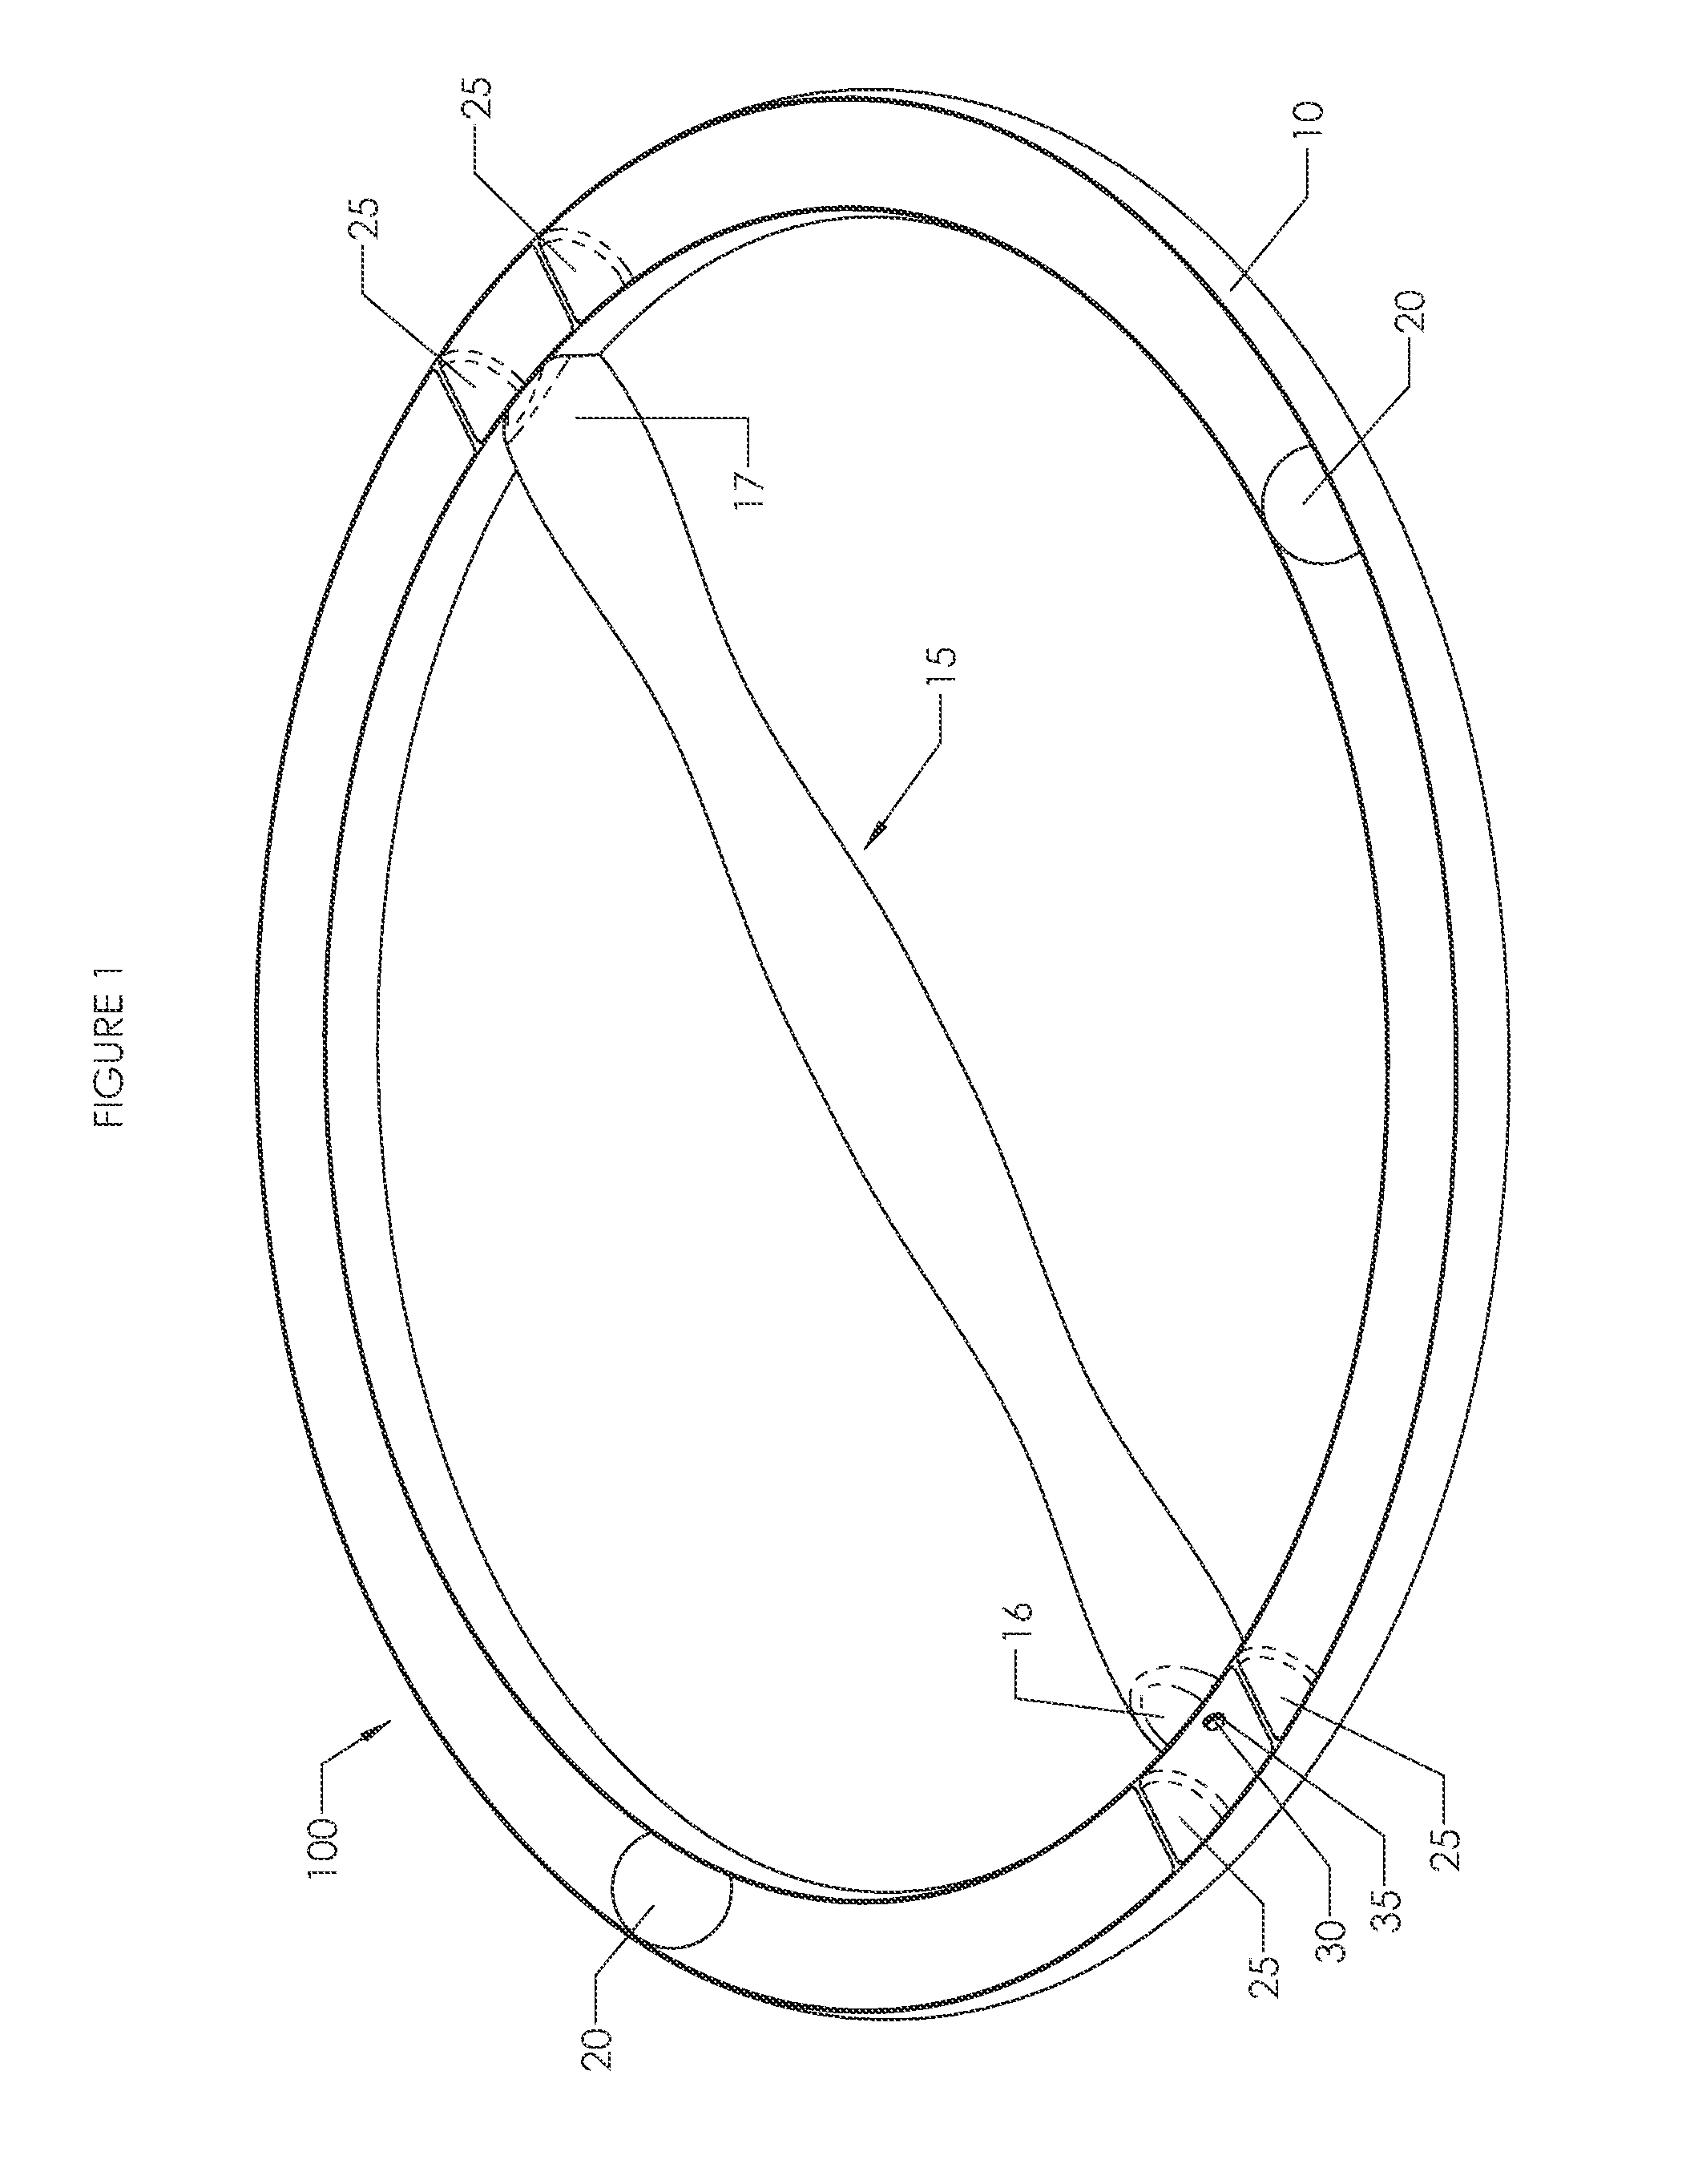 Exercise Device and Method of Use